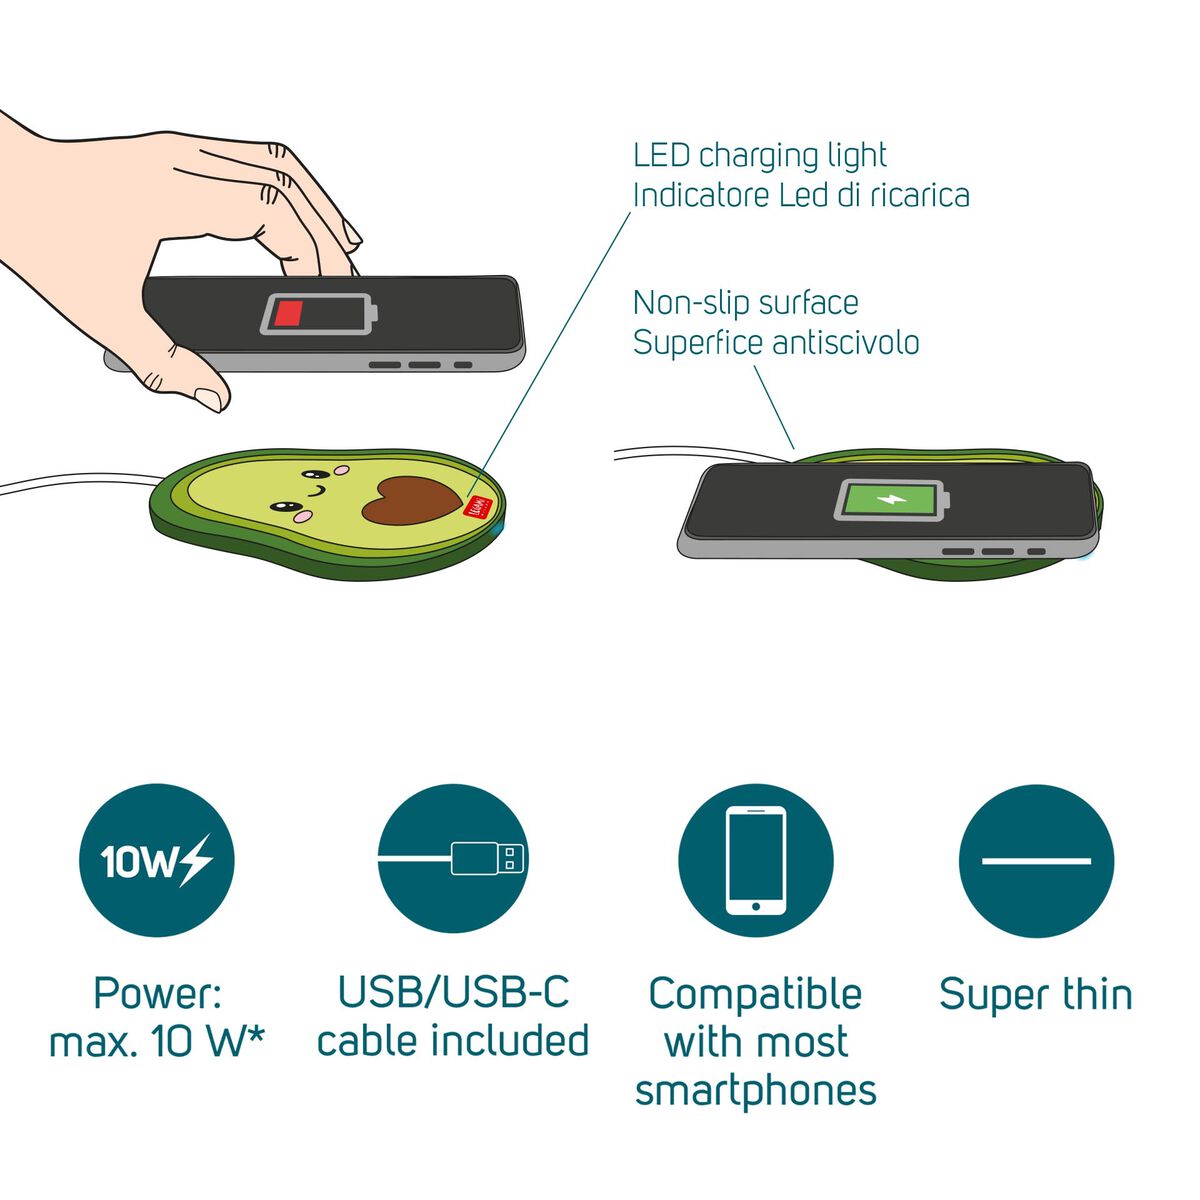 Tech | Legami Smartphone Wireless Charger Avocado Weirs of Baggot St